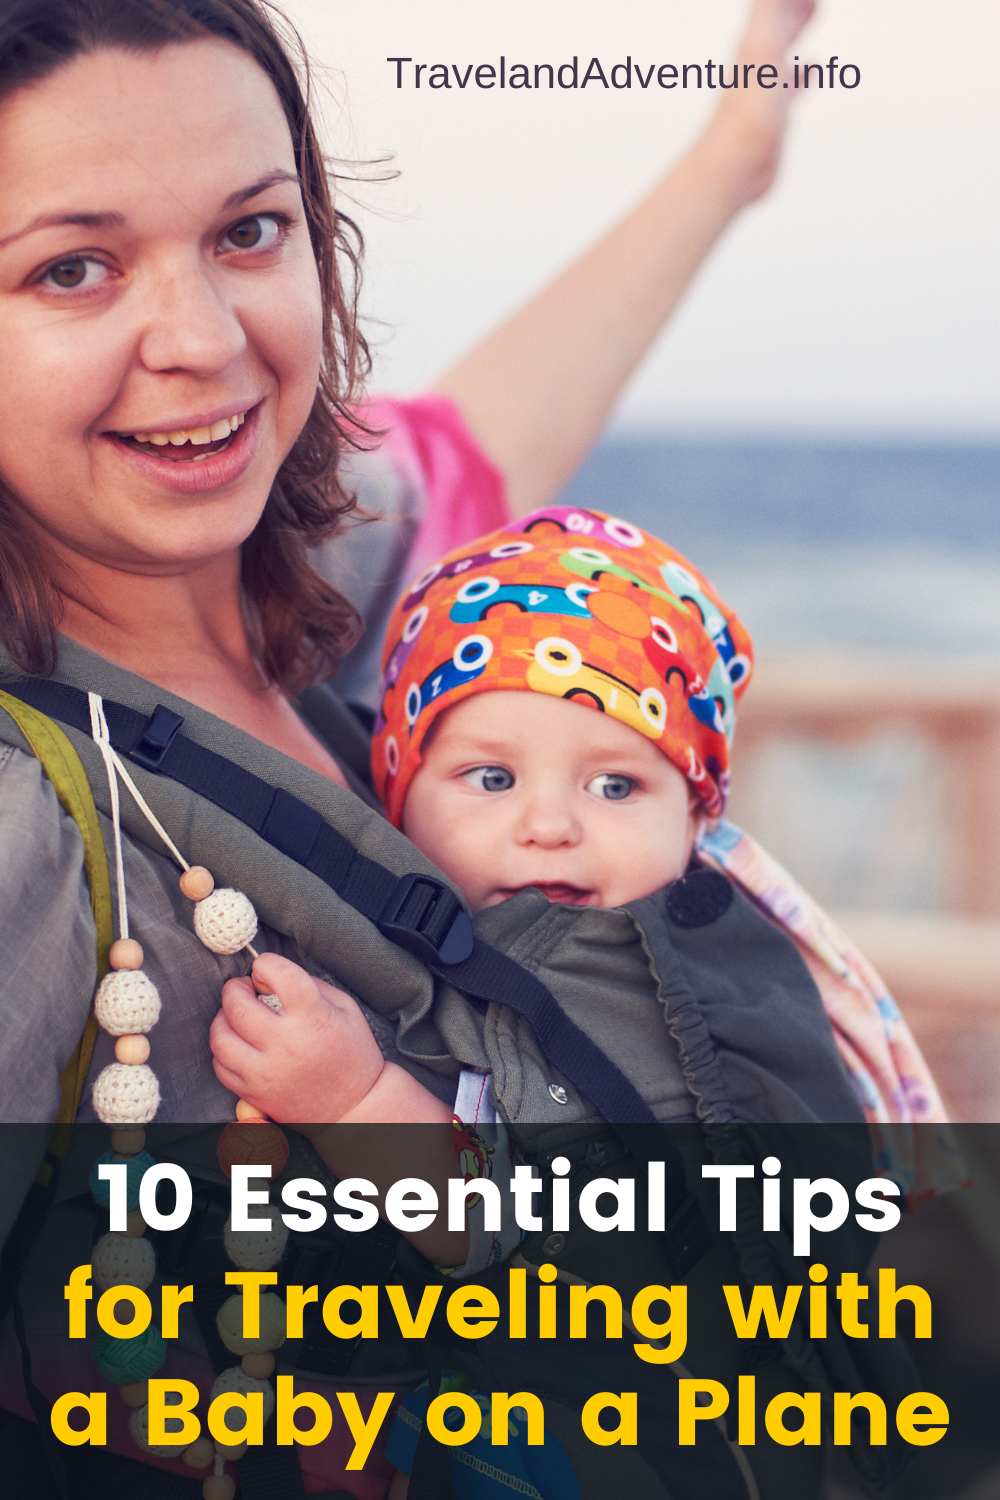 10 Essential Tips for Traveling with a Baby on a Plane